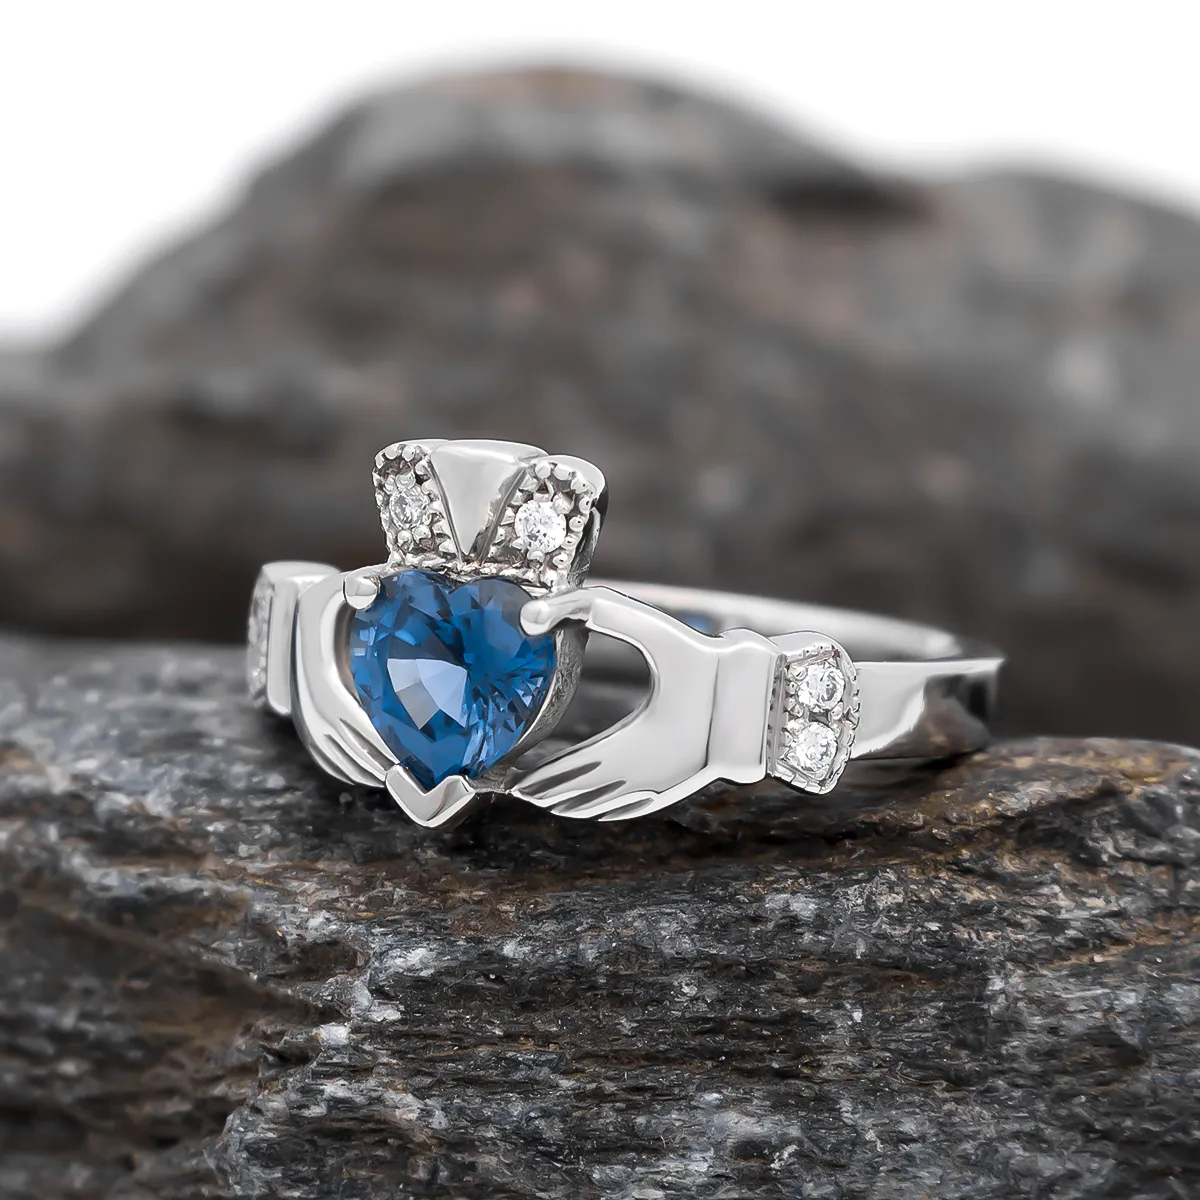 1 IJCR0035 White Gold Claddagh Ring With Sapphire 5